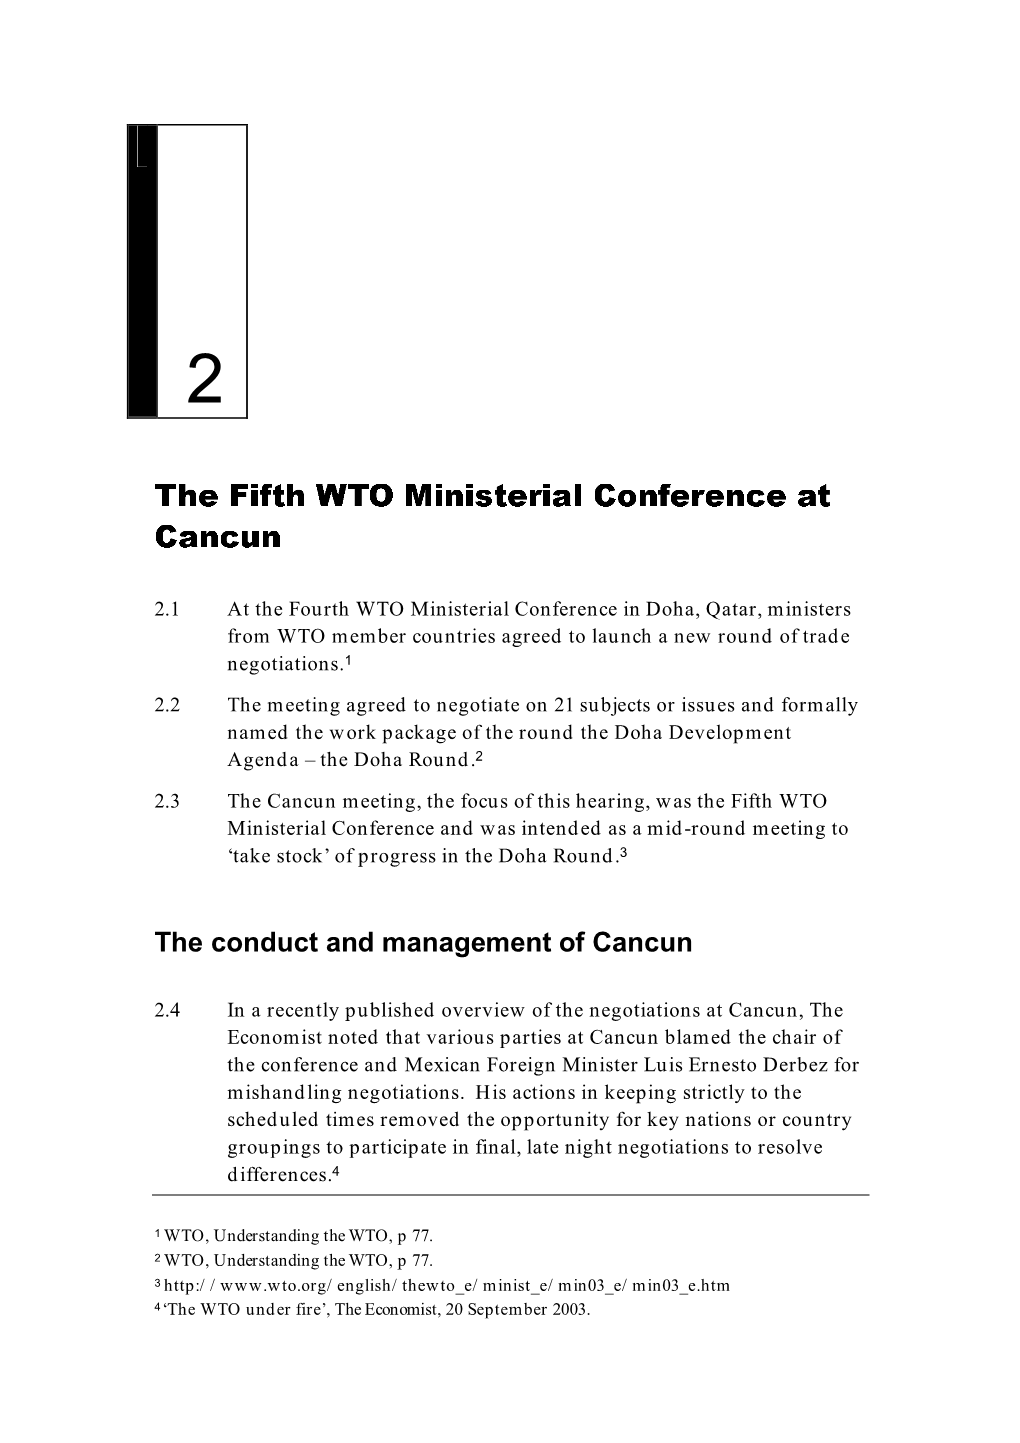 Chapter 2: the Fifth WTO Ministerial Conference at Cancun